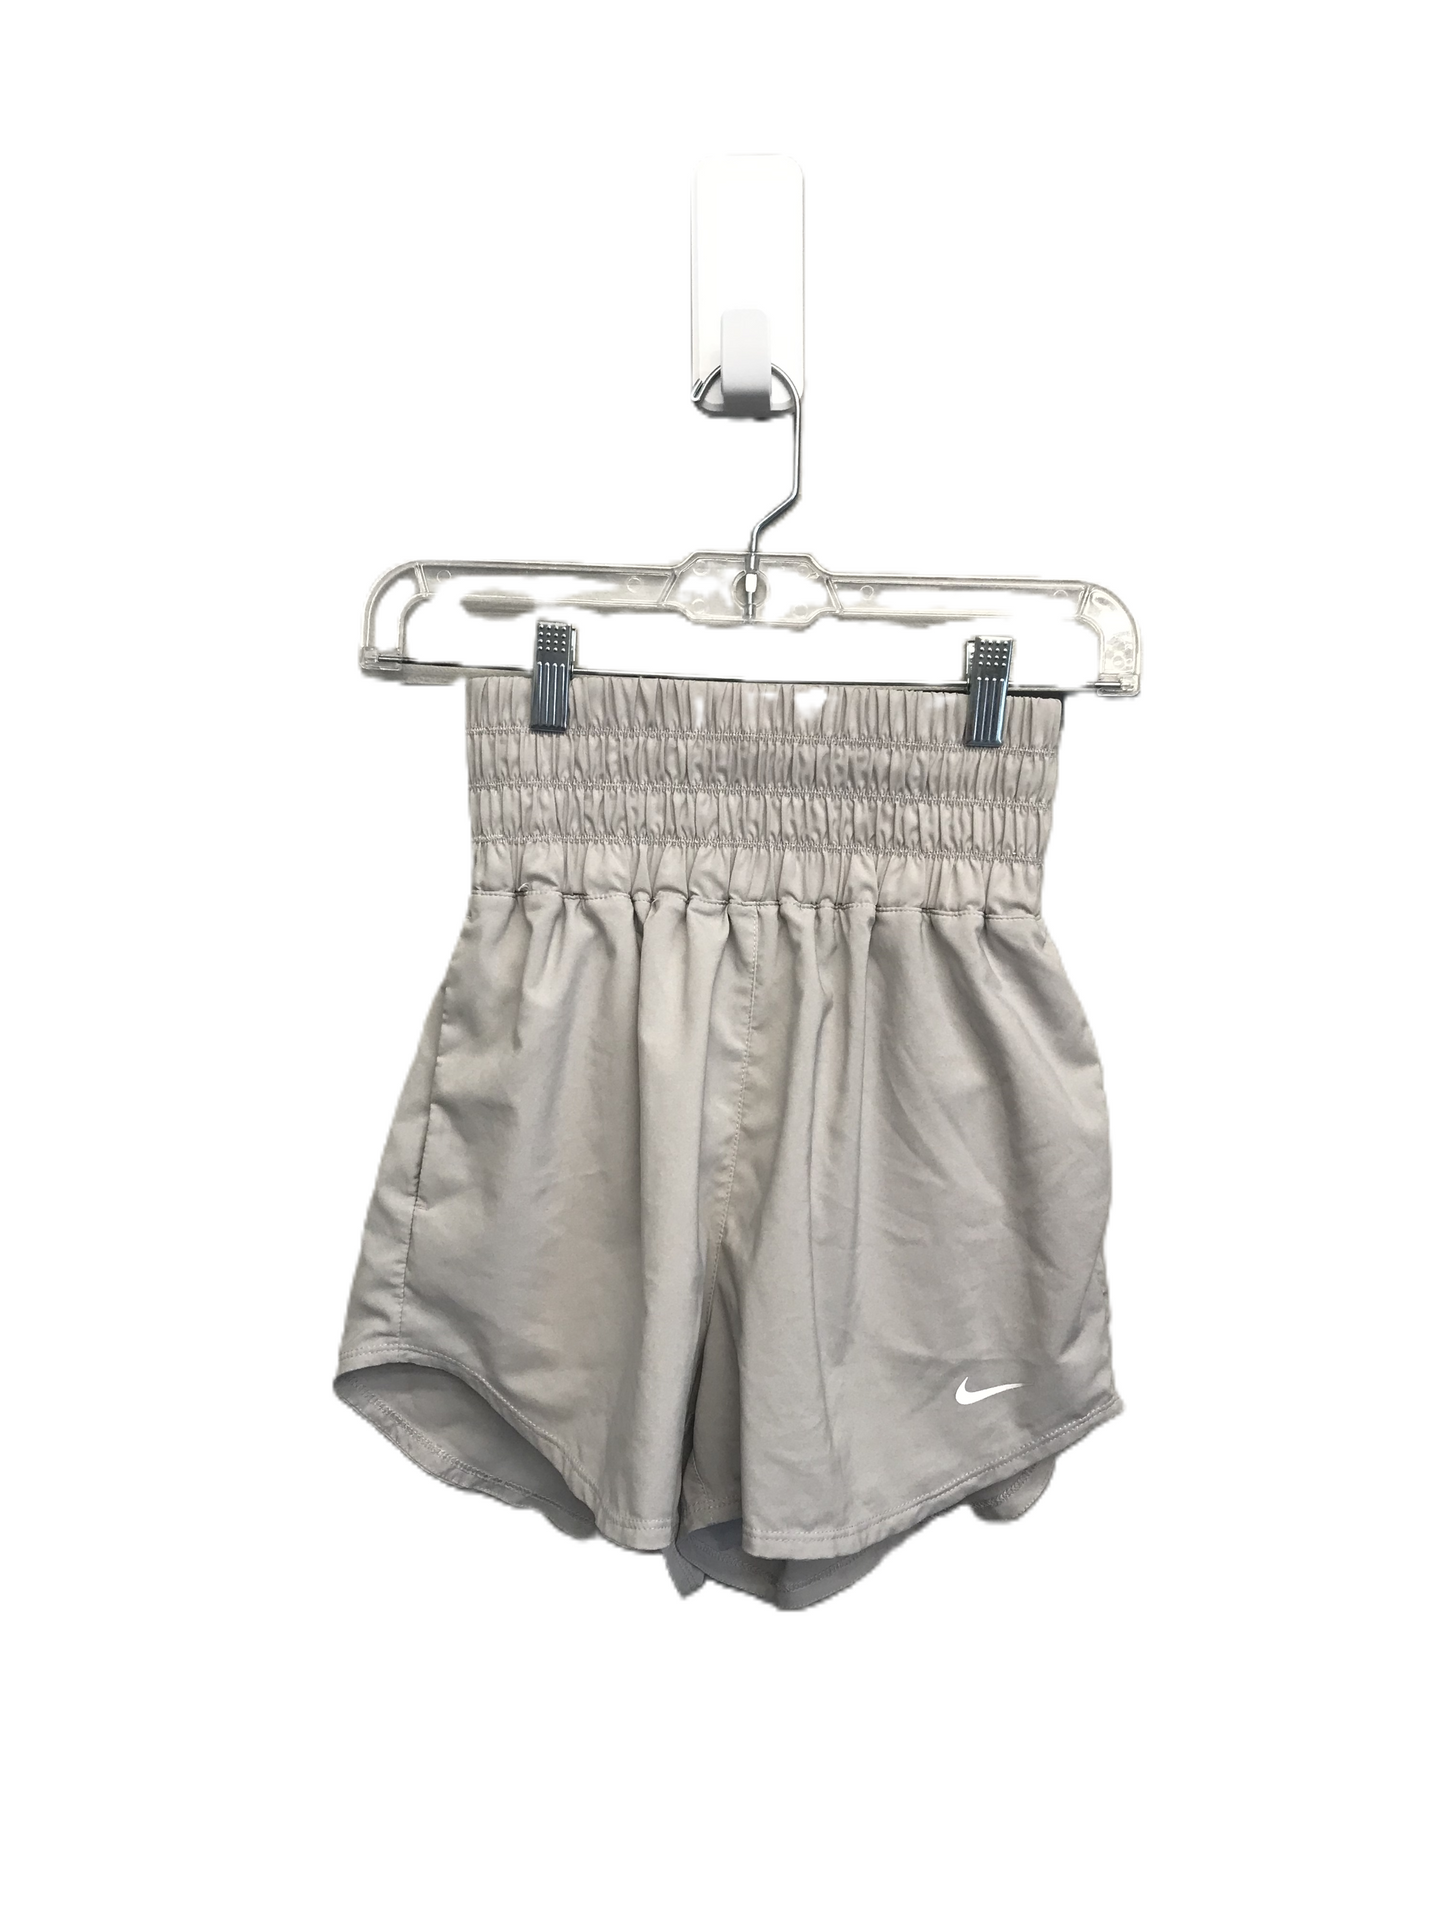 Grey Athletic Shorts By Nike Apparel, Size: Xs